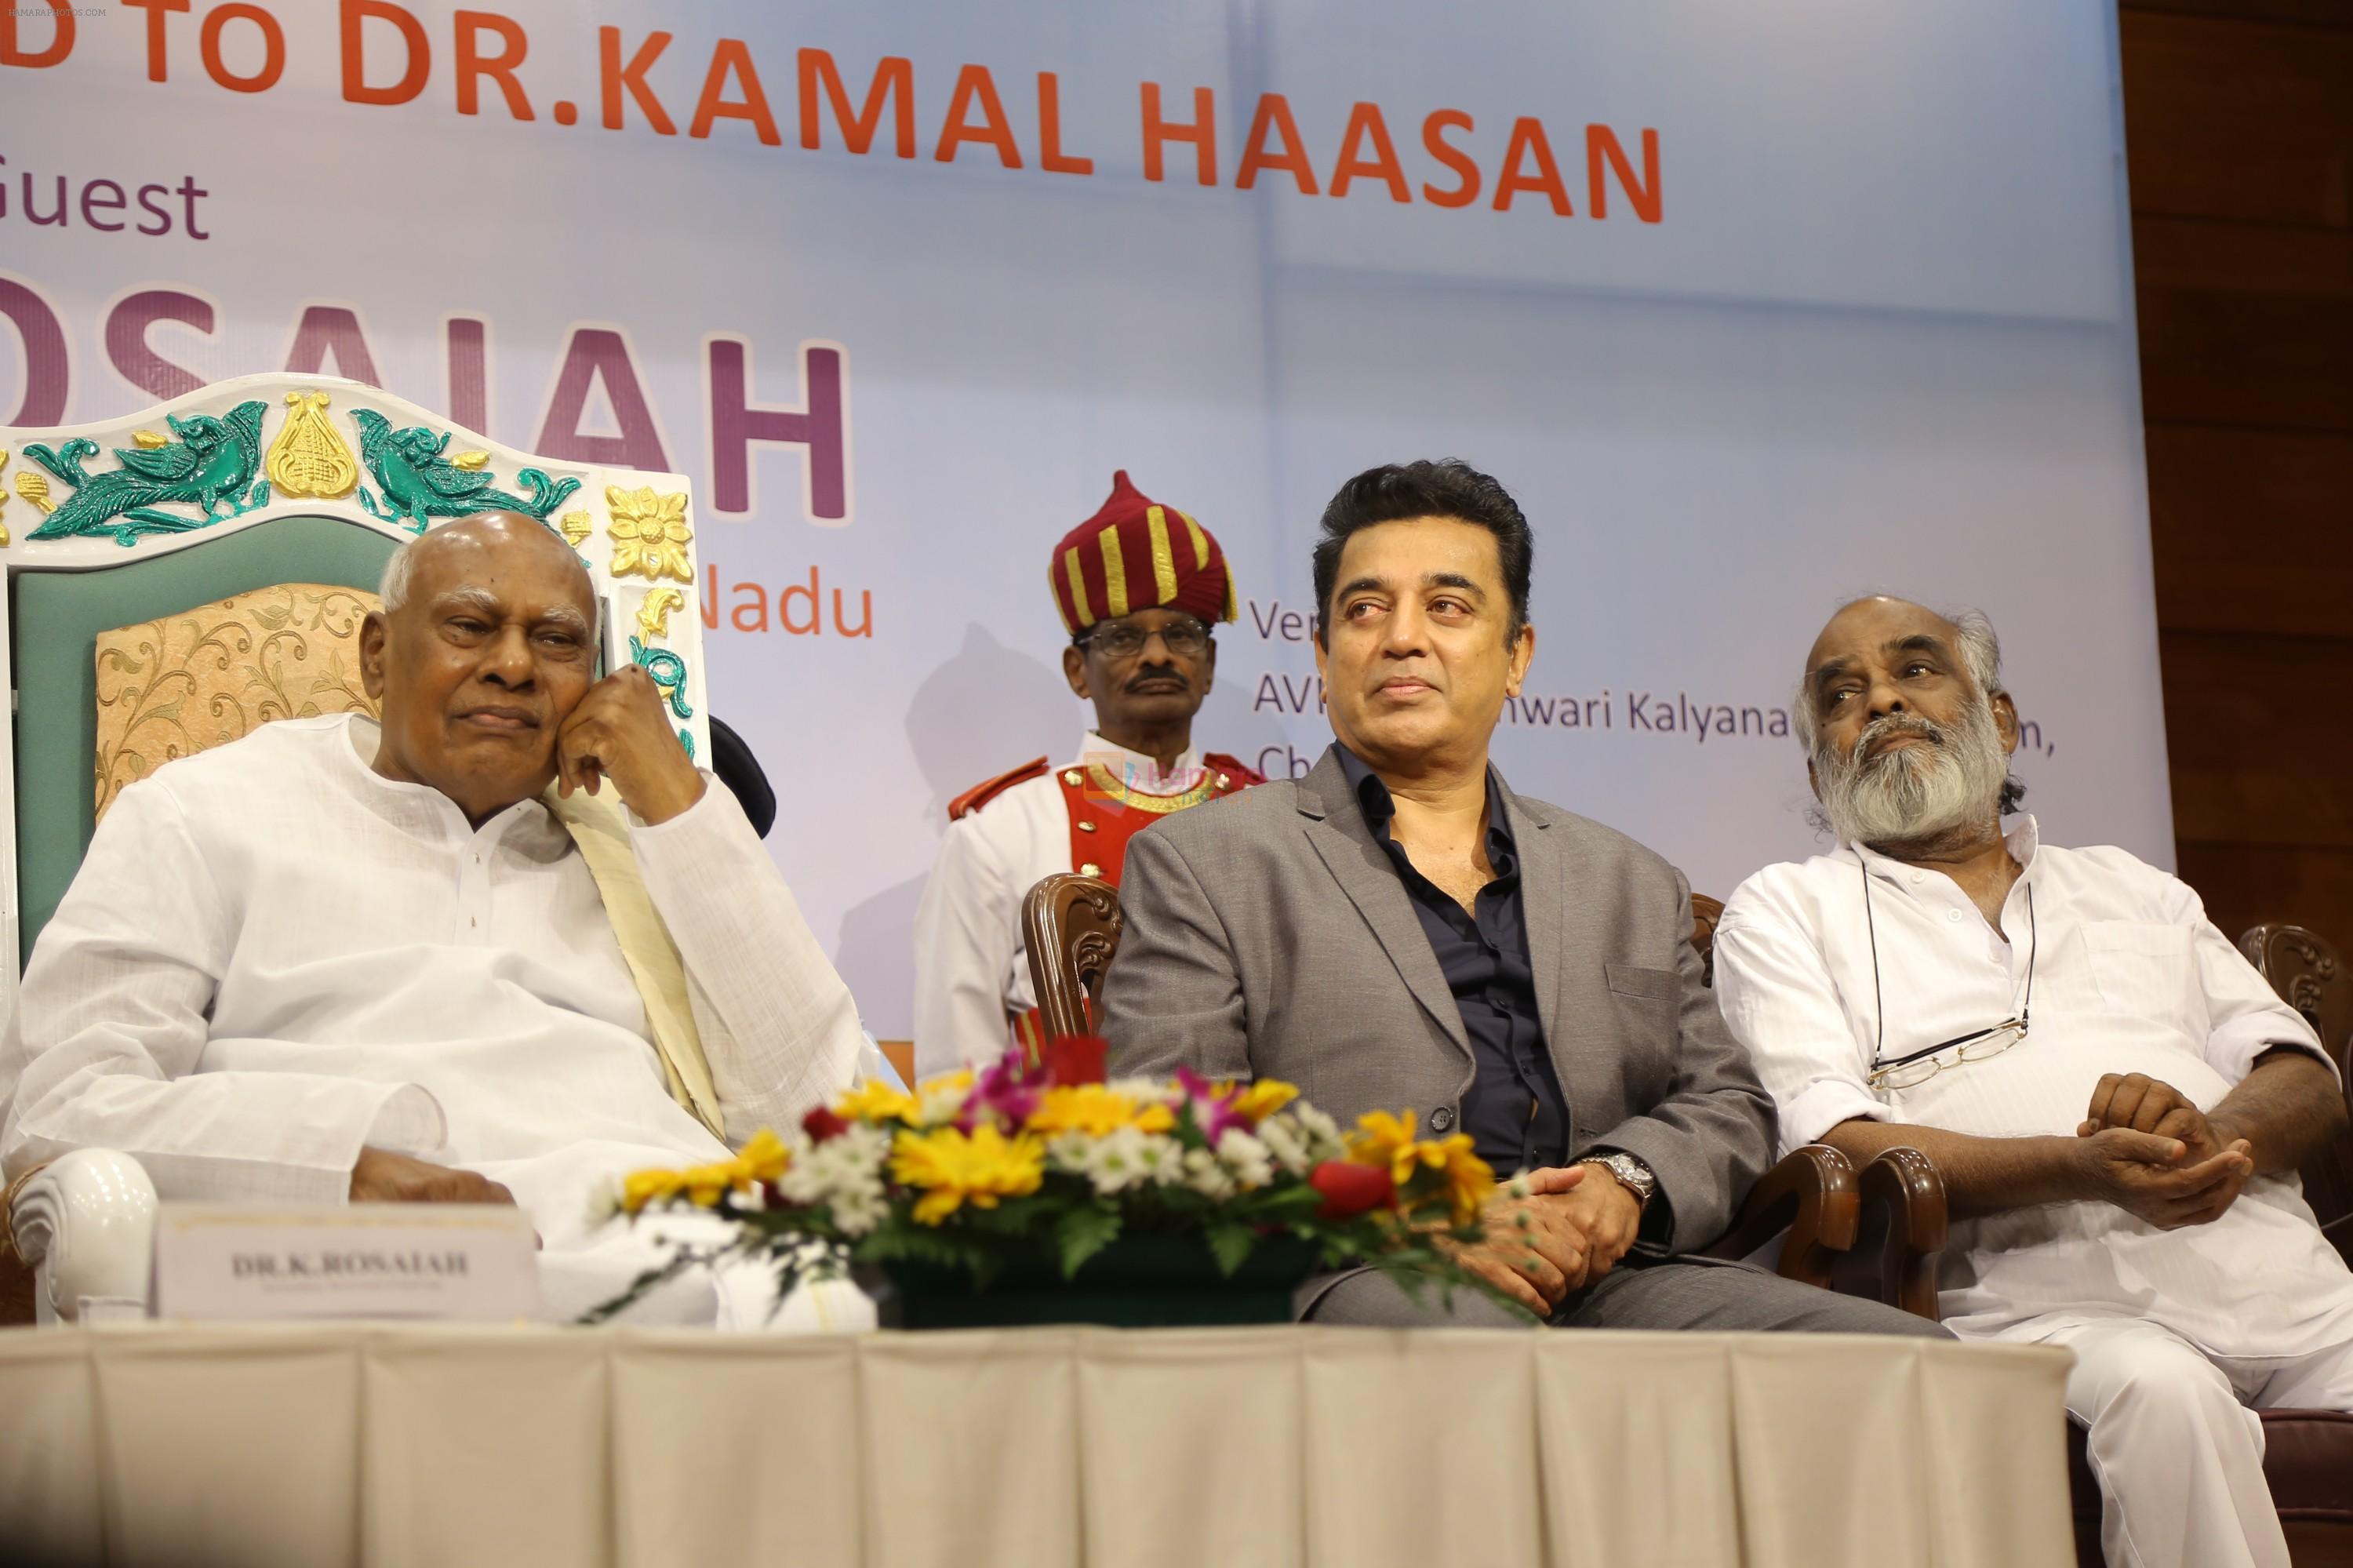 Felicitation to Dr.Kamal Haasan by Chief Guest - H.E. Dr.K.Rosaiah